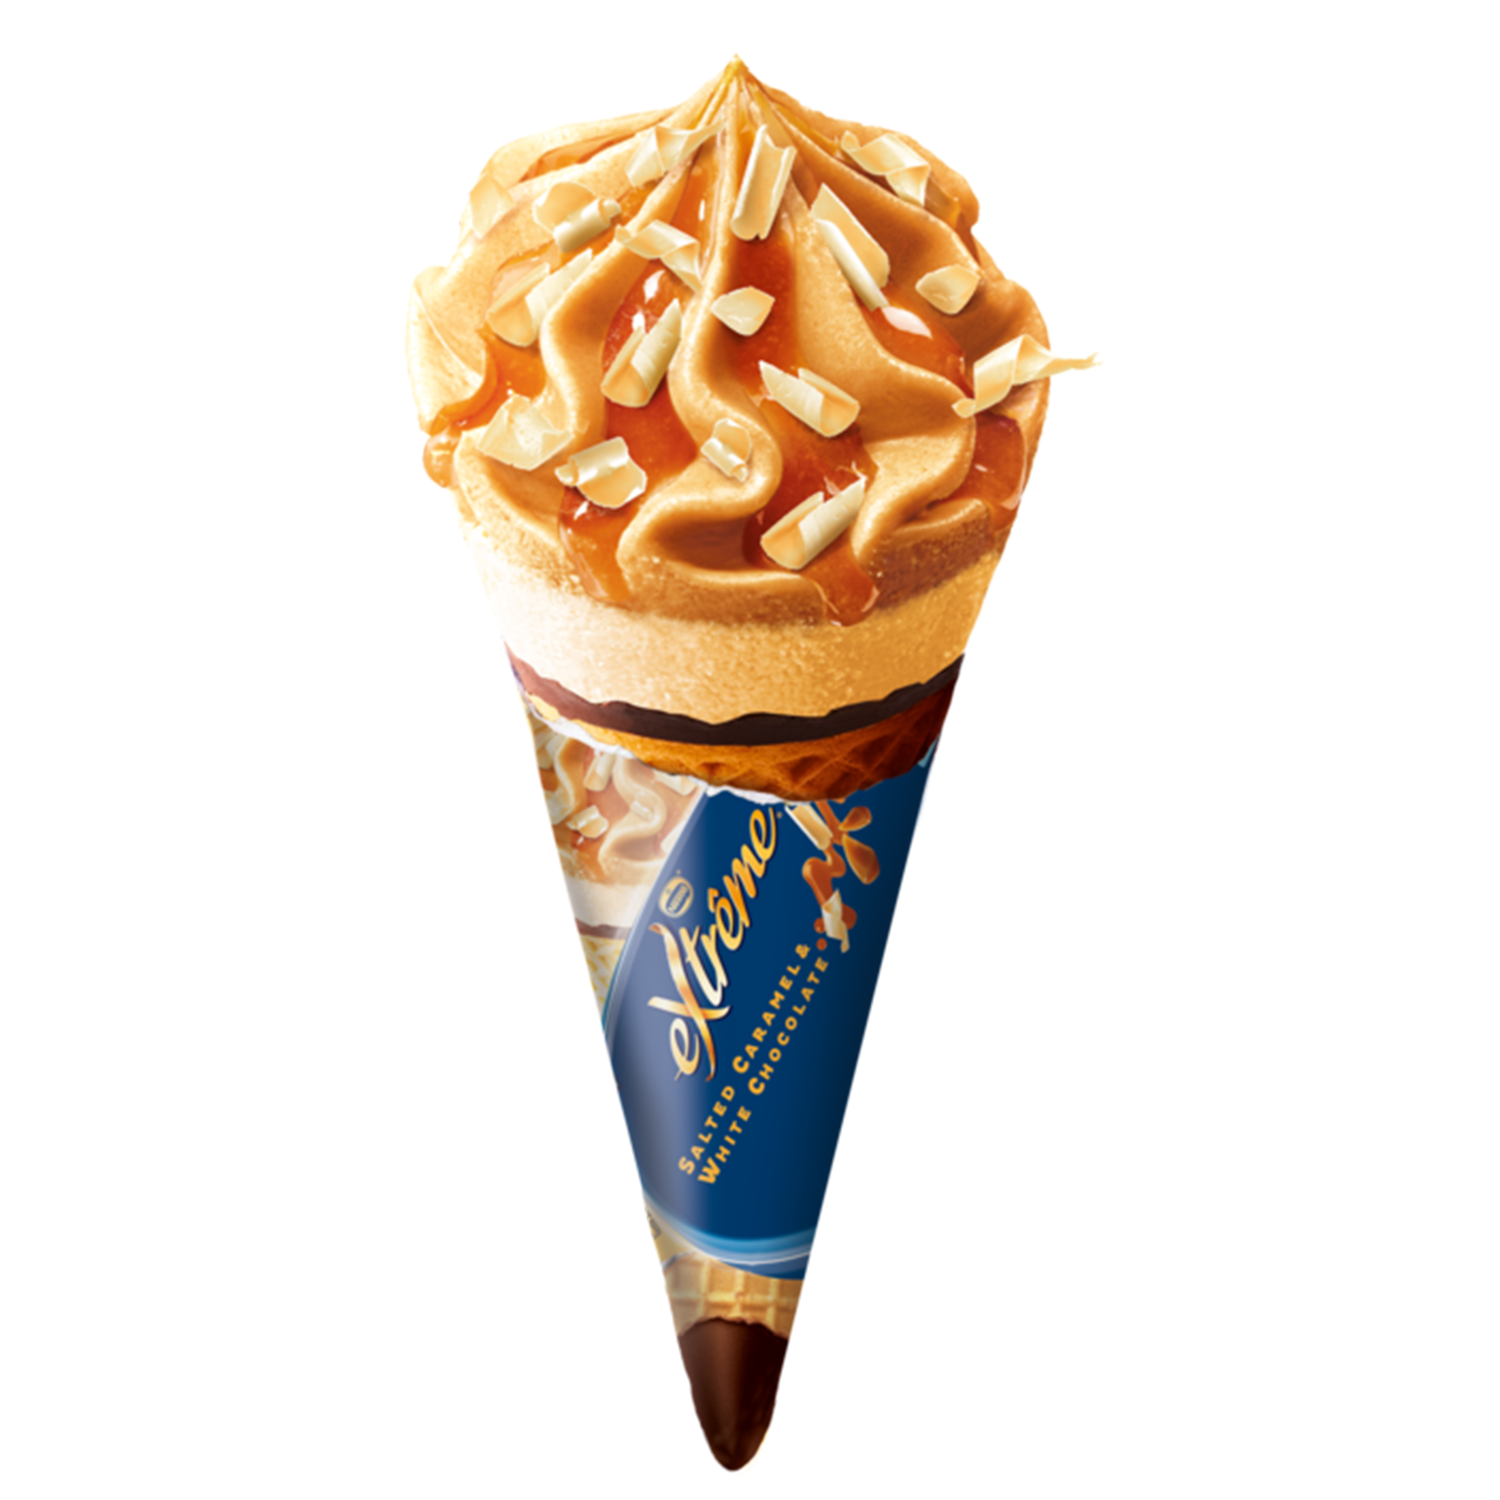 Xtreme Salted Caramel - Ice Cream Supply wholesale from D'Auria Brothers